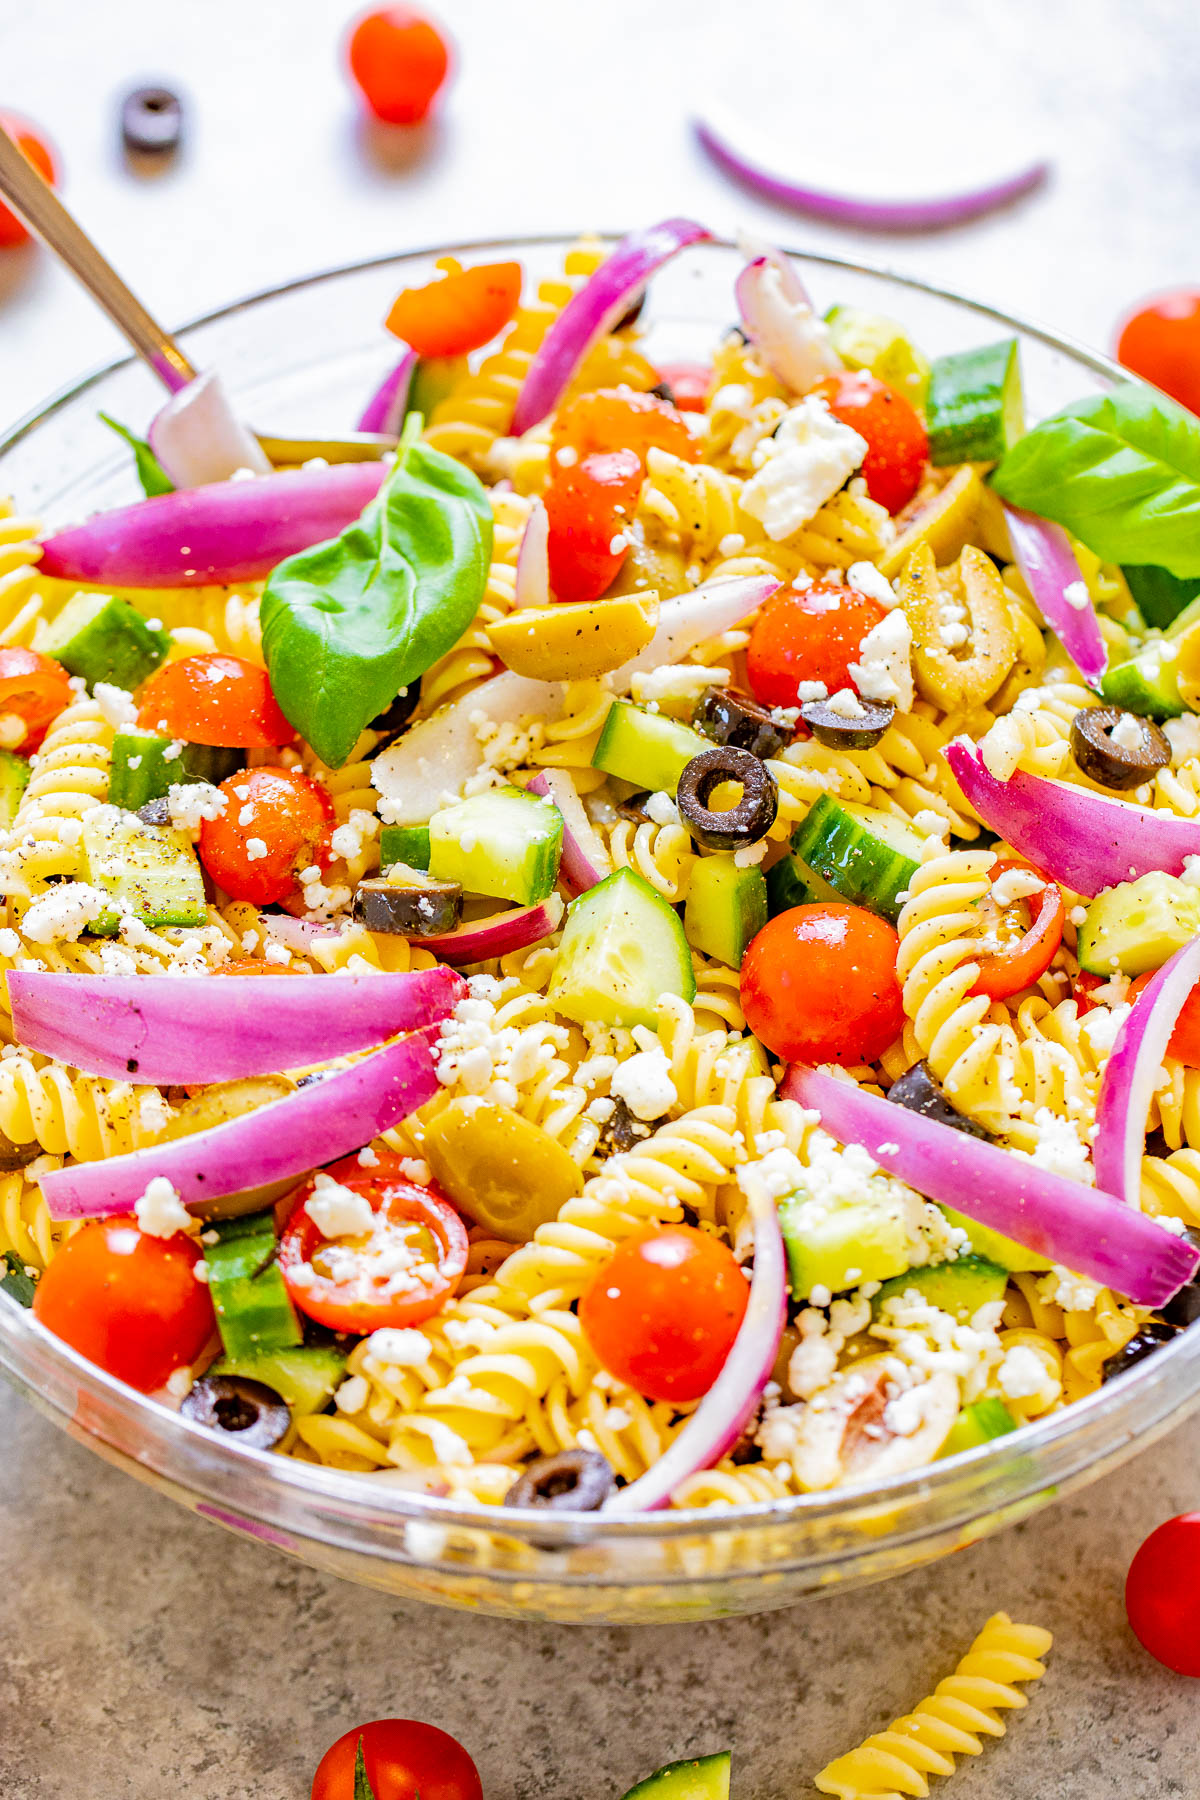 Mediterranean Pasta Salad - Juicy tomatoes and cucumbers, black and green olives, crumbled feta, and tender pasta are tossed in a homemade balsamic vinaigrette! An EASY pasta salad recipe with Mediterranean-inspired ingredients that's ready in under 30 minutes! It makes a big batch and is perfect for potlucks, picnics, or planned leftovers. 